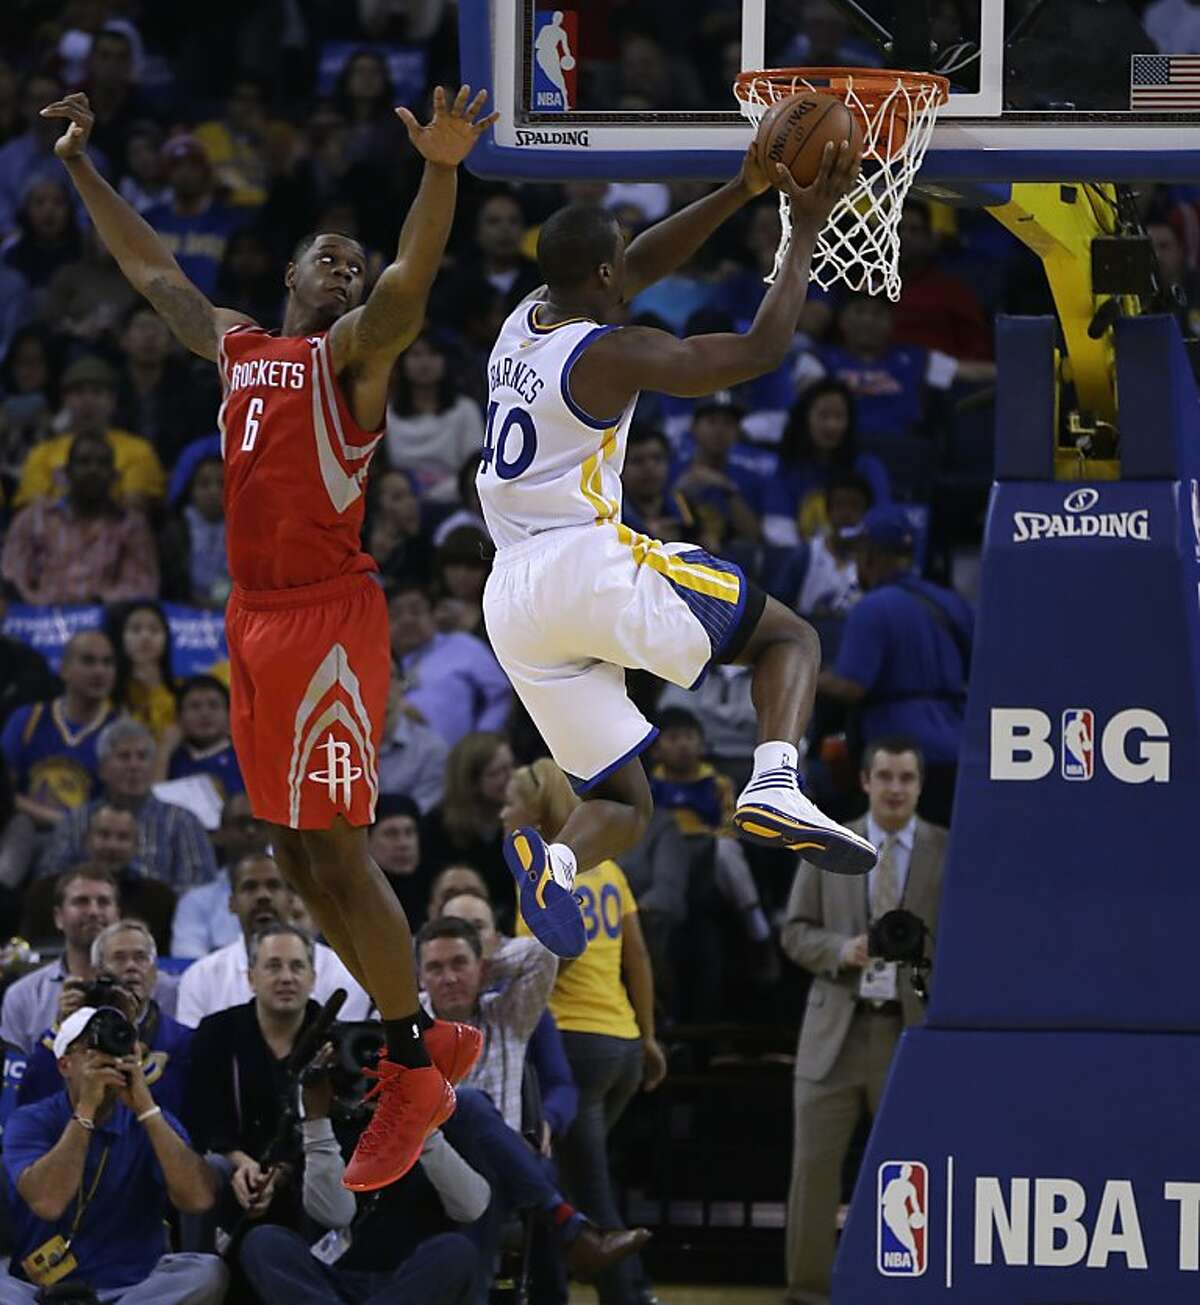 Golden State Warriors' Harrison Barnes, right, drives past Houston Rockets' Terrence Jones (6) during the first half of an NBA basketball game Friday, Dec. 13, 2013, in Oakland, Calif. (AP Photo/Ben Margot)